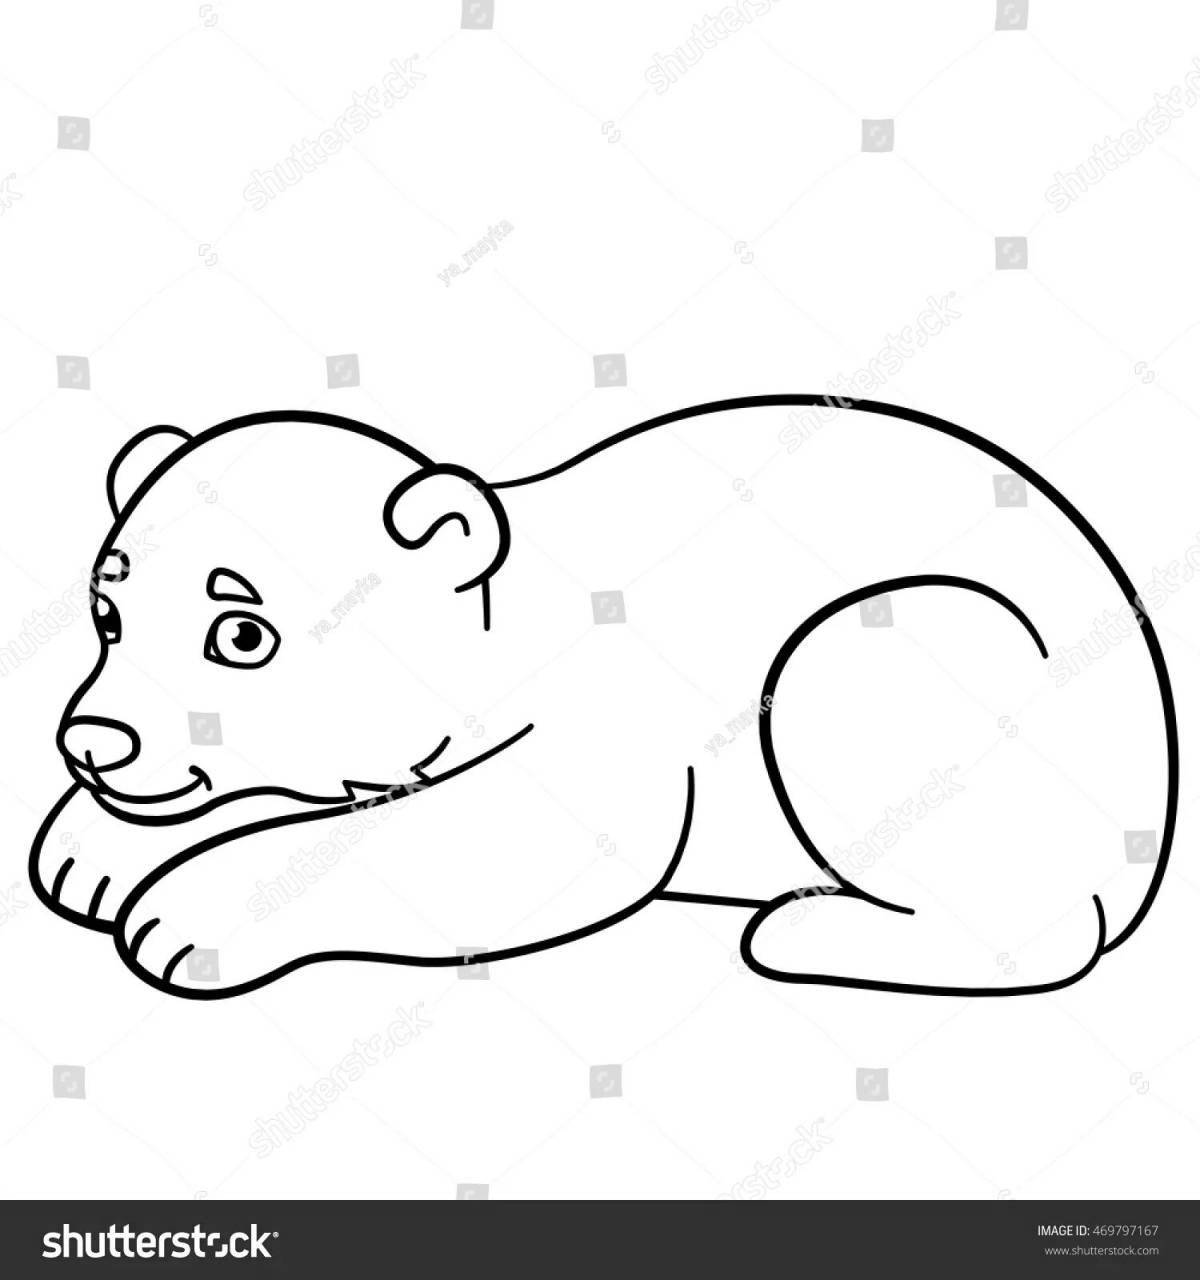 Amazing bear in a den drawing